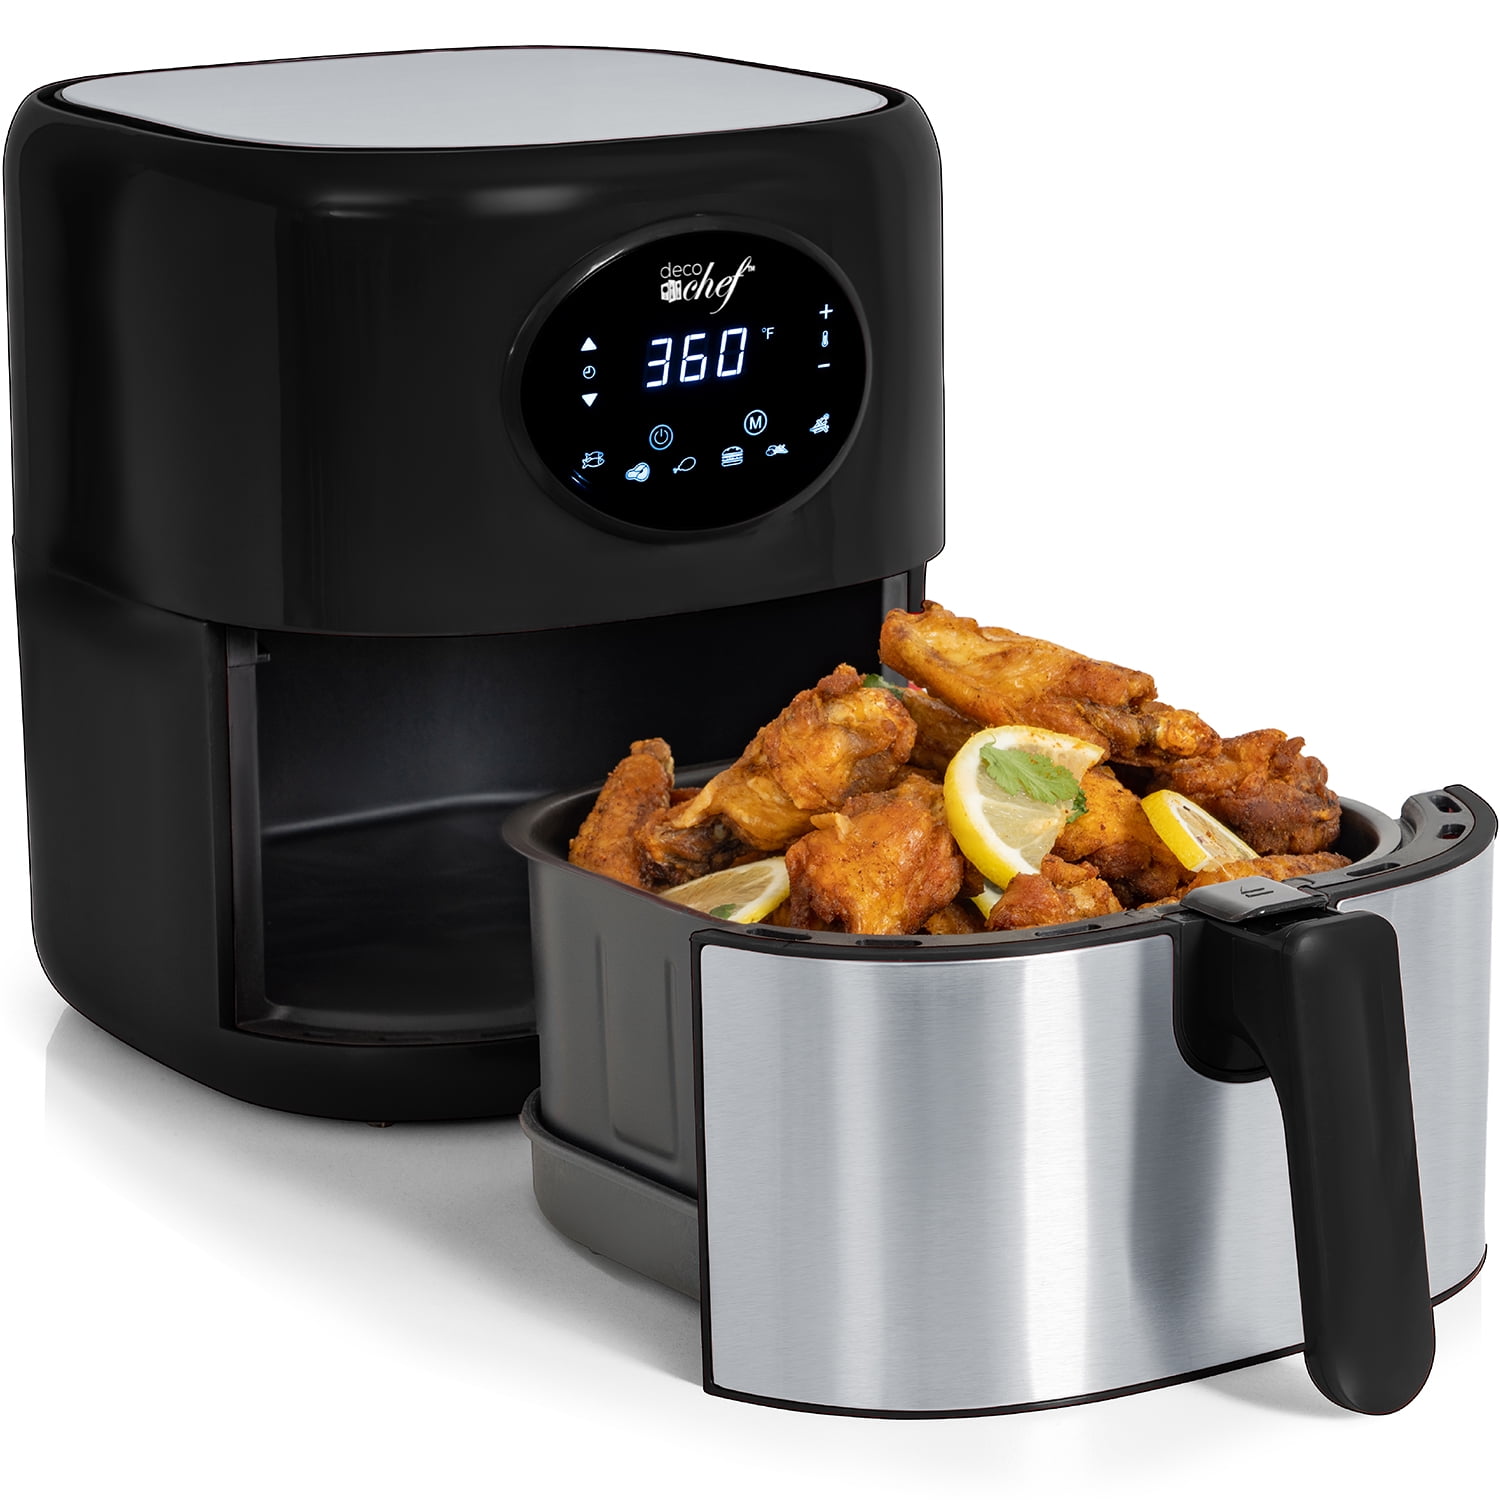 3.5 Liter Capacity w/Dishwasher Safe Parts Simple Chef Air Fryer Air Fryer For Healthy Oil Free Cooking Renewed 